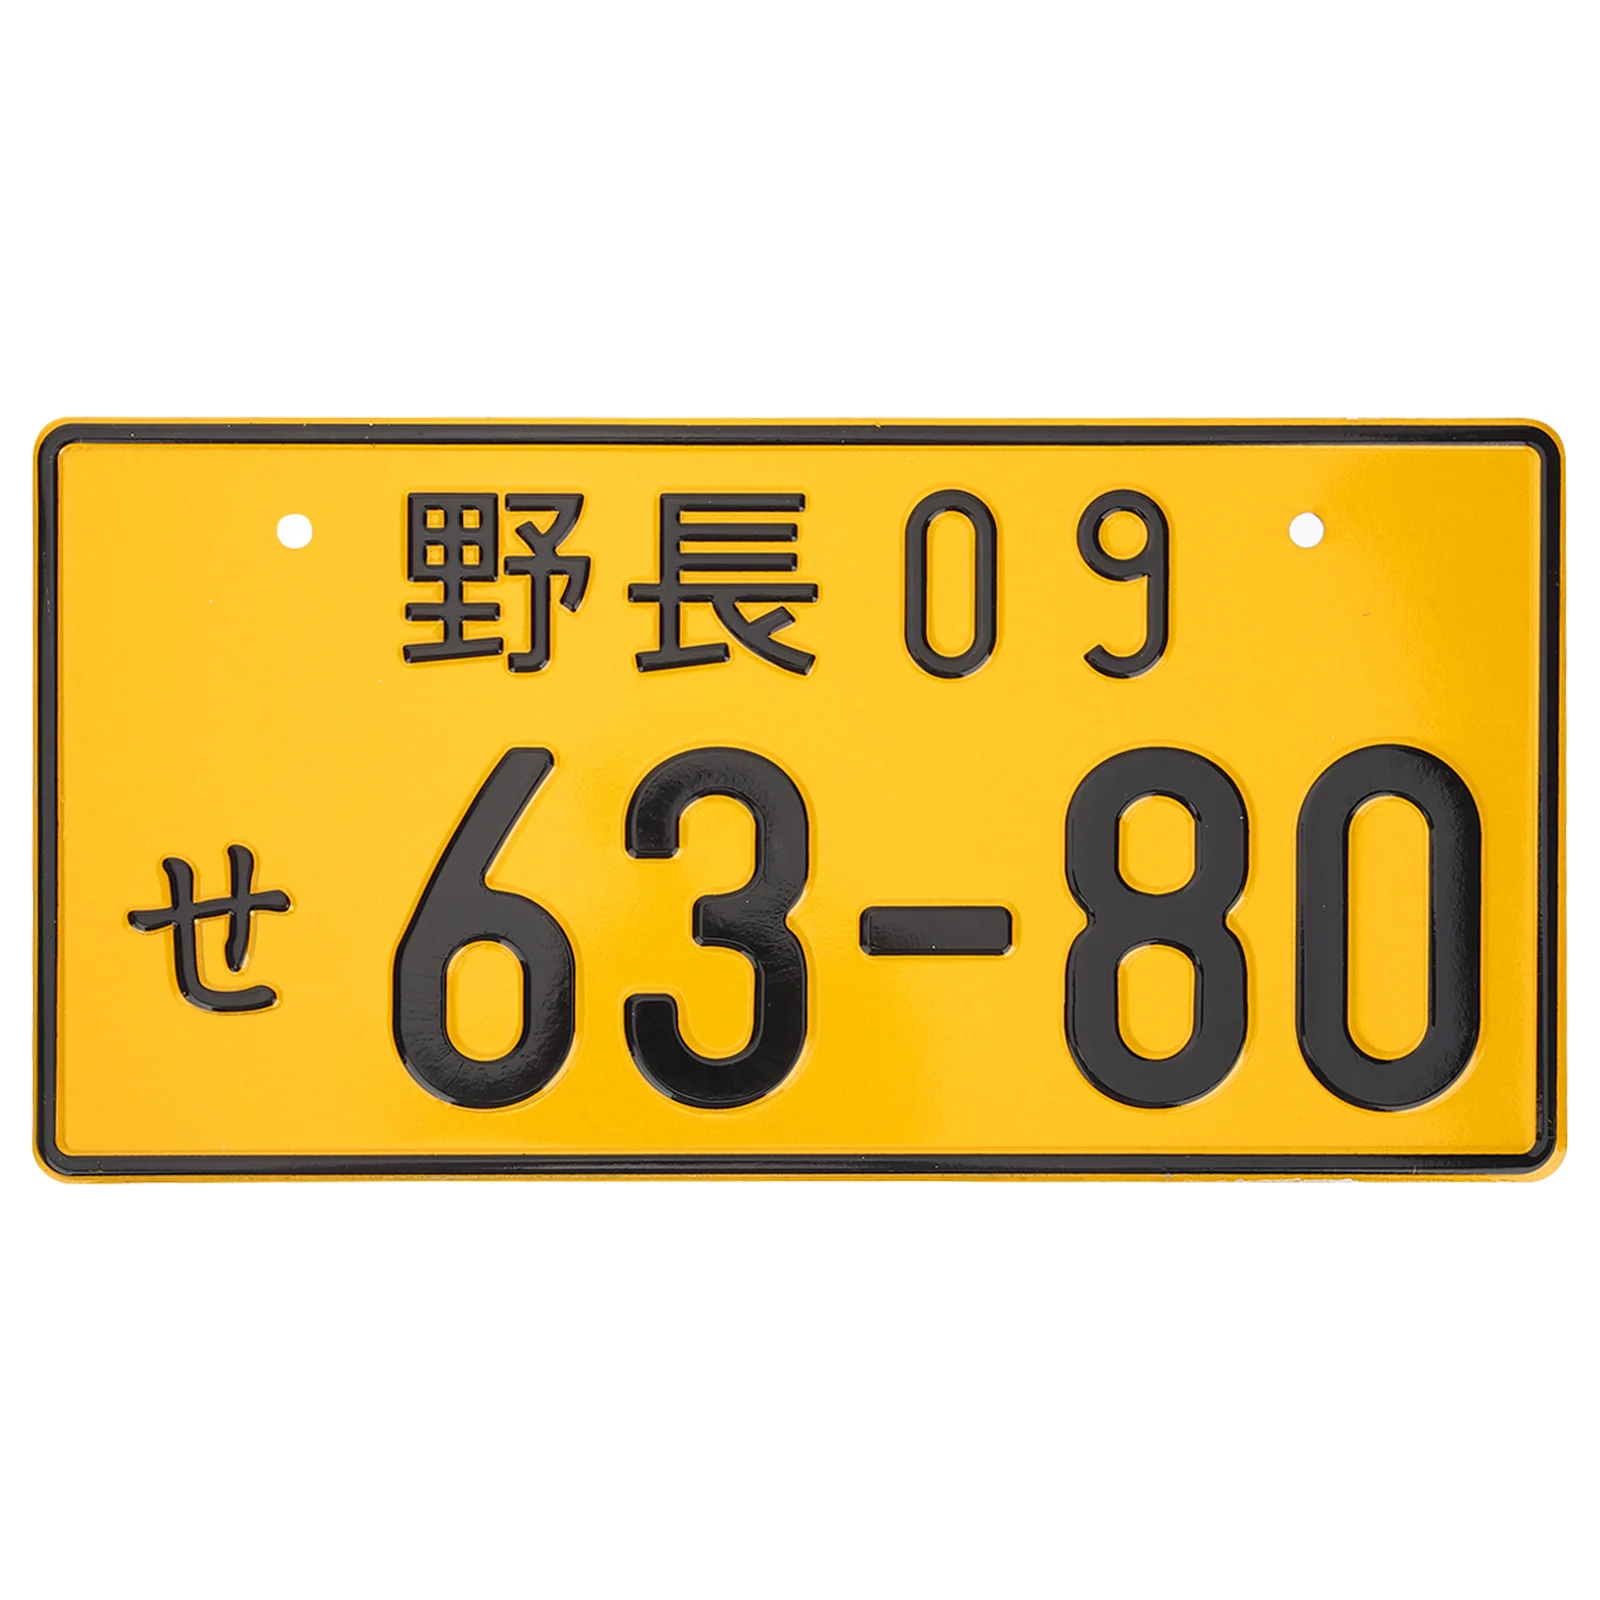 

Truck Accessories Number Plate for Car License Characters Numbers Japanese Auto Tag Aluminum Temporary Vanity